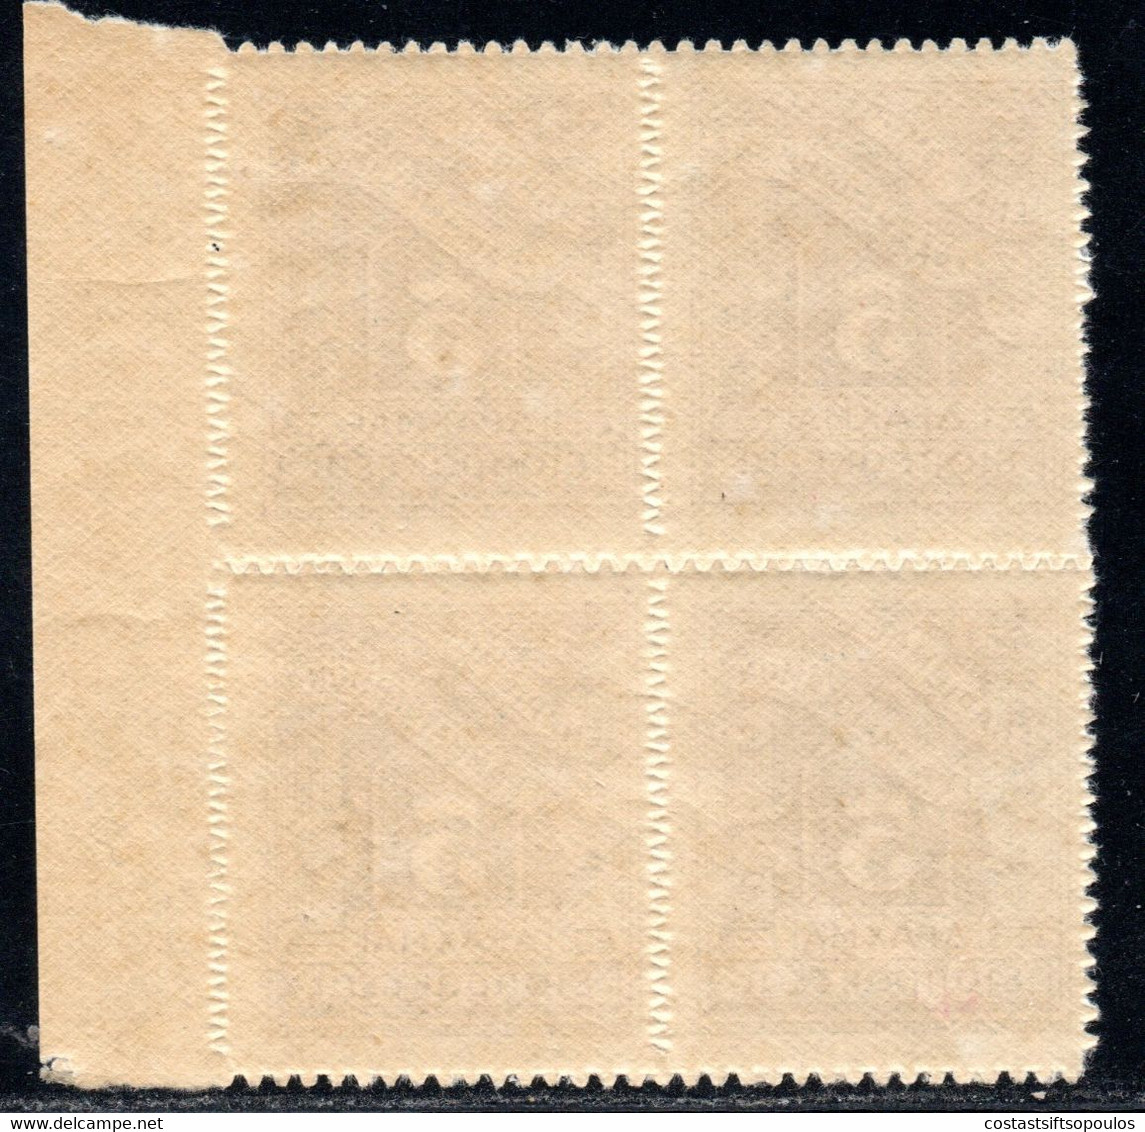 1395. GREECE.1913-1928 POSTAGE DUE. 5 DR. MNH BLOCK OF 4  VERY FINE AND FRESH. - Nuovi